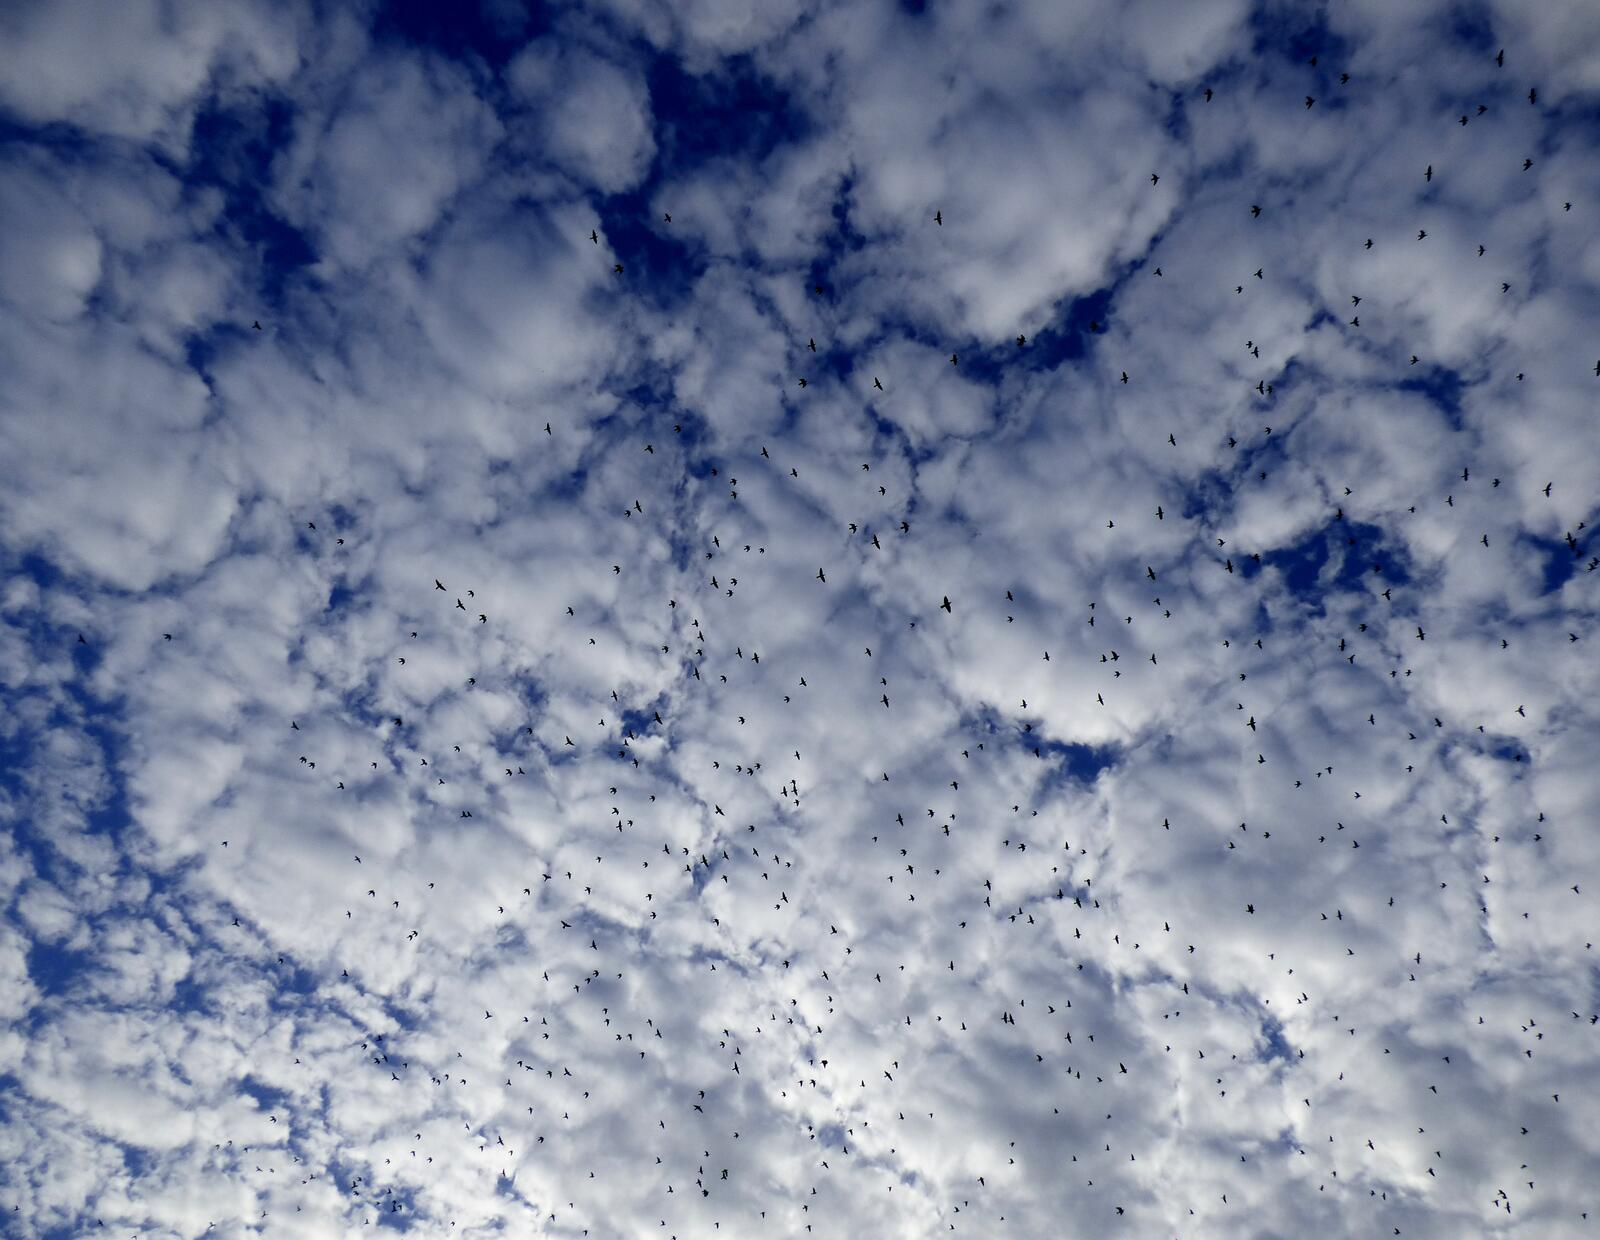 Wallpapers nature a cloud sky on the desktop